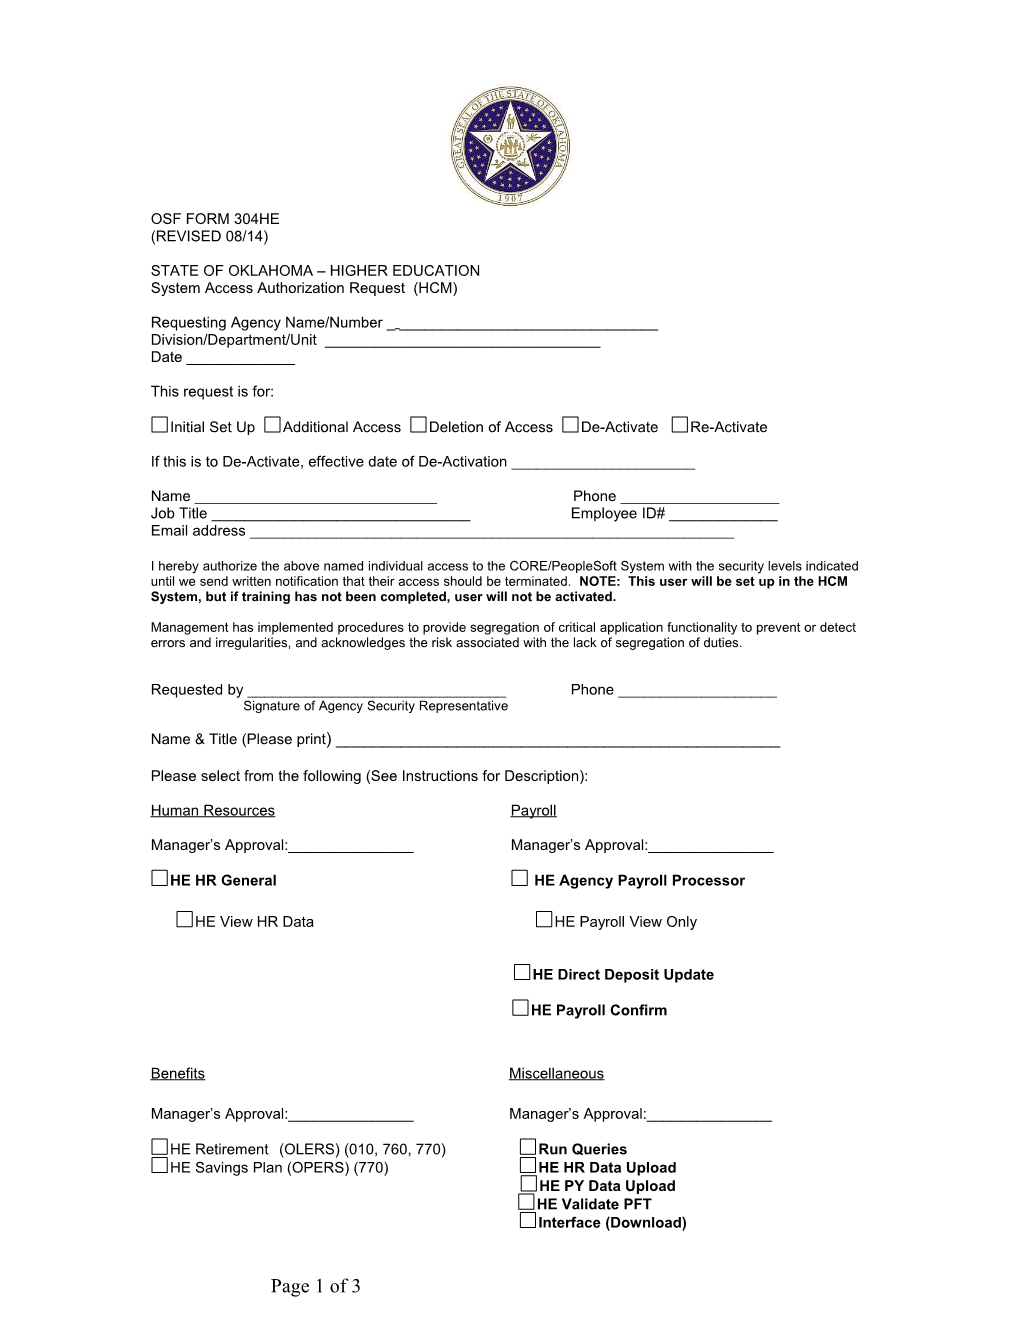 OSF Form 304 - System Access Request - Higher Education Human Resources